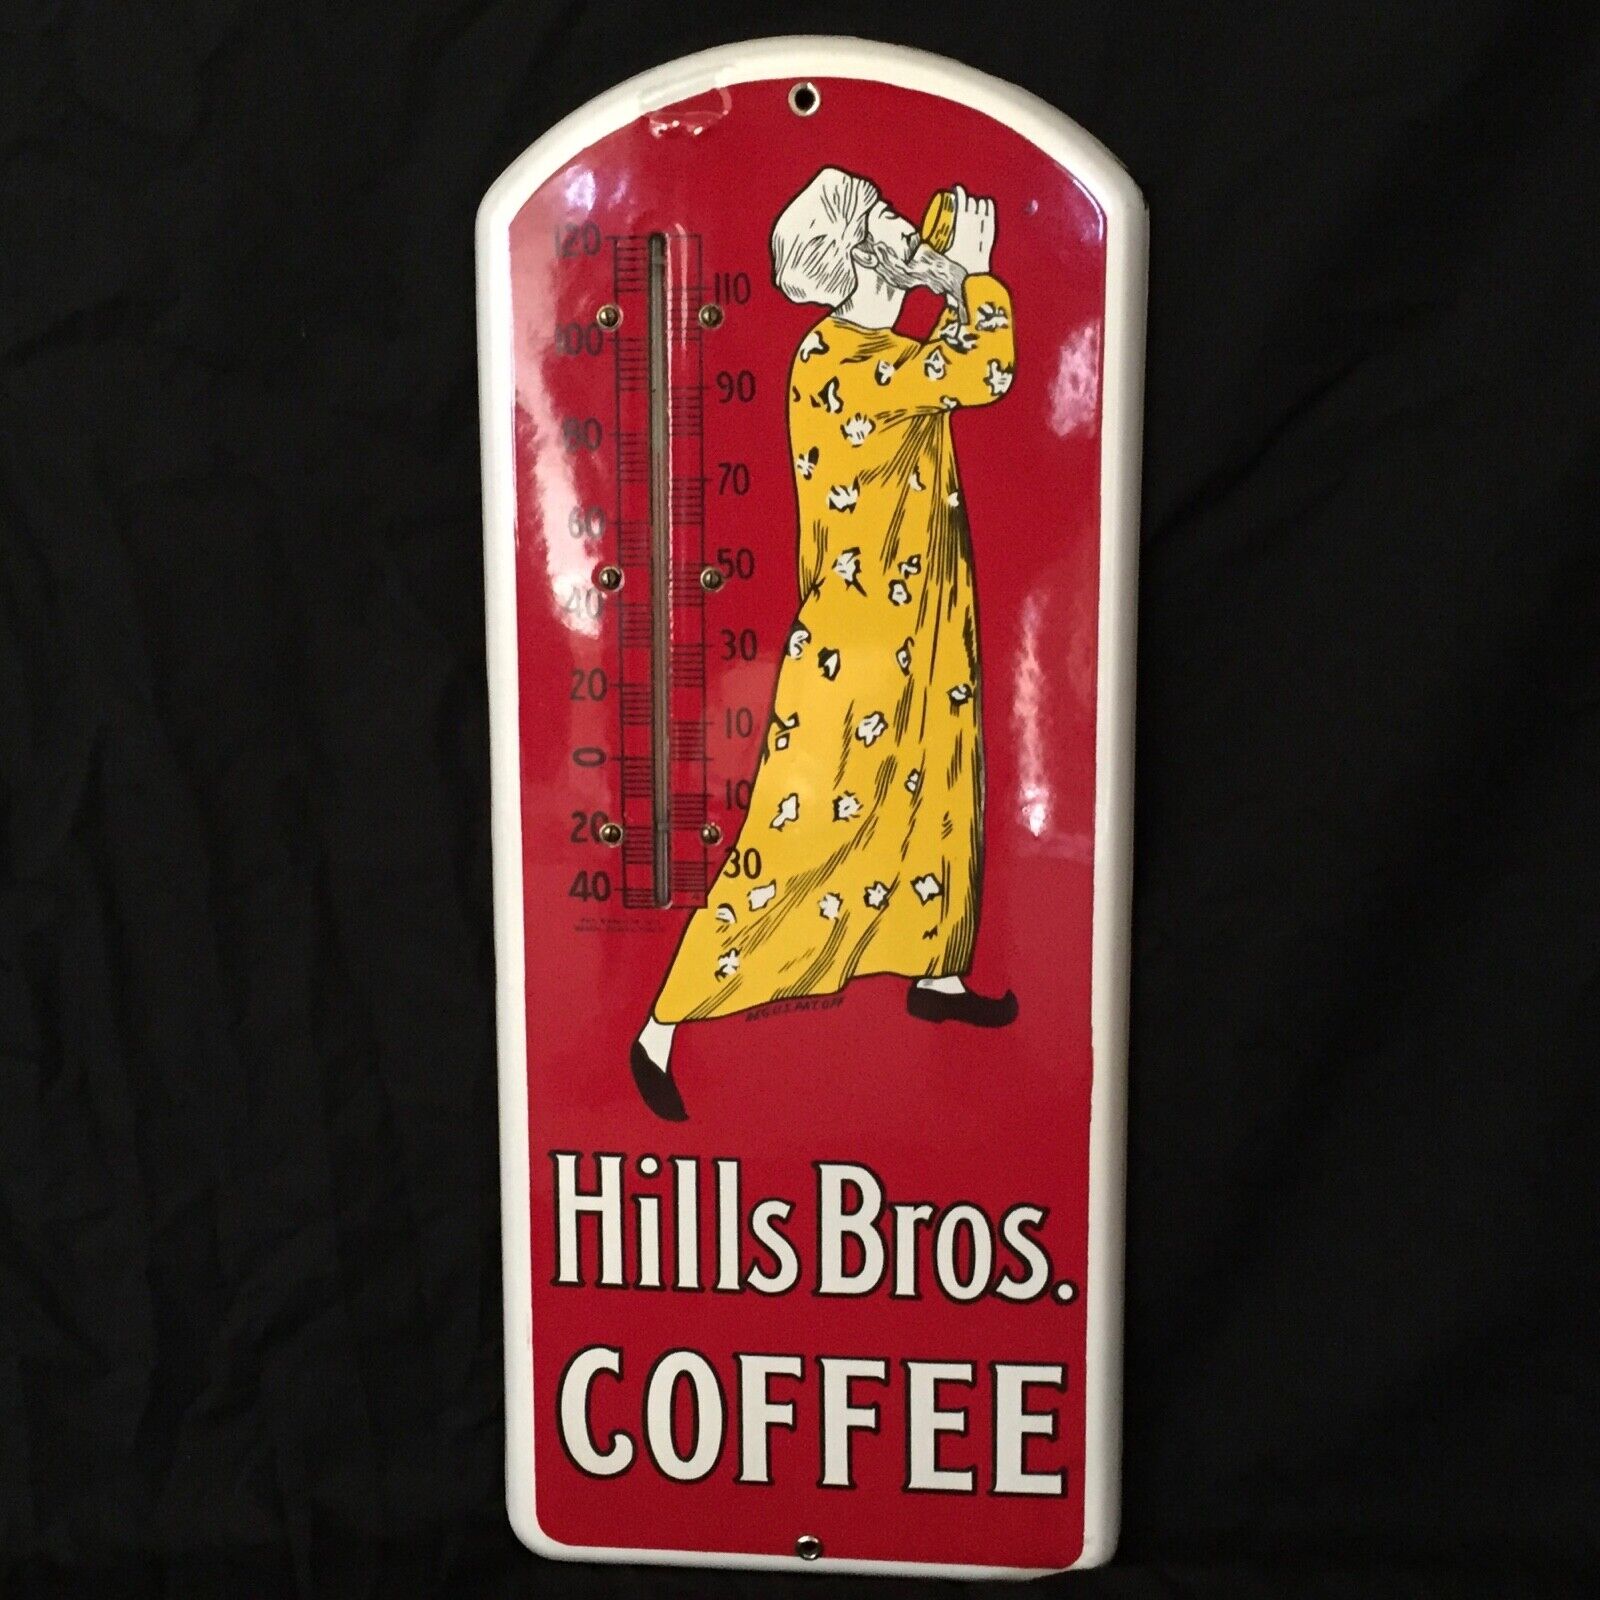 ANTIQUE ORIGINAL HILLS BROTHERS COFFEE THERMOMETER PORCELAIN SIGN - NEAR MINT